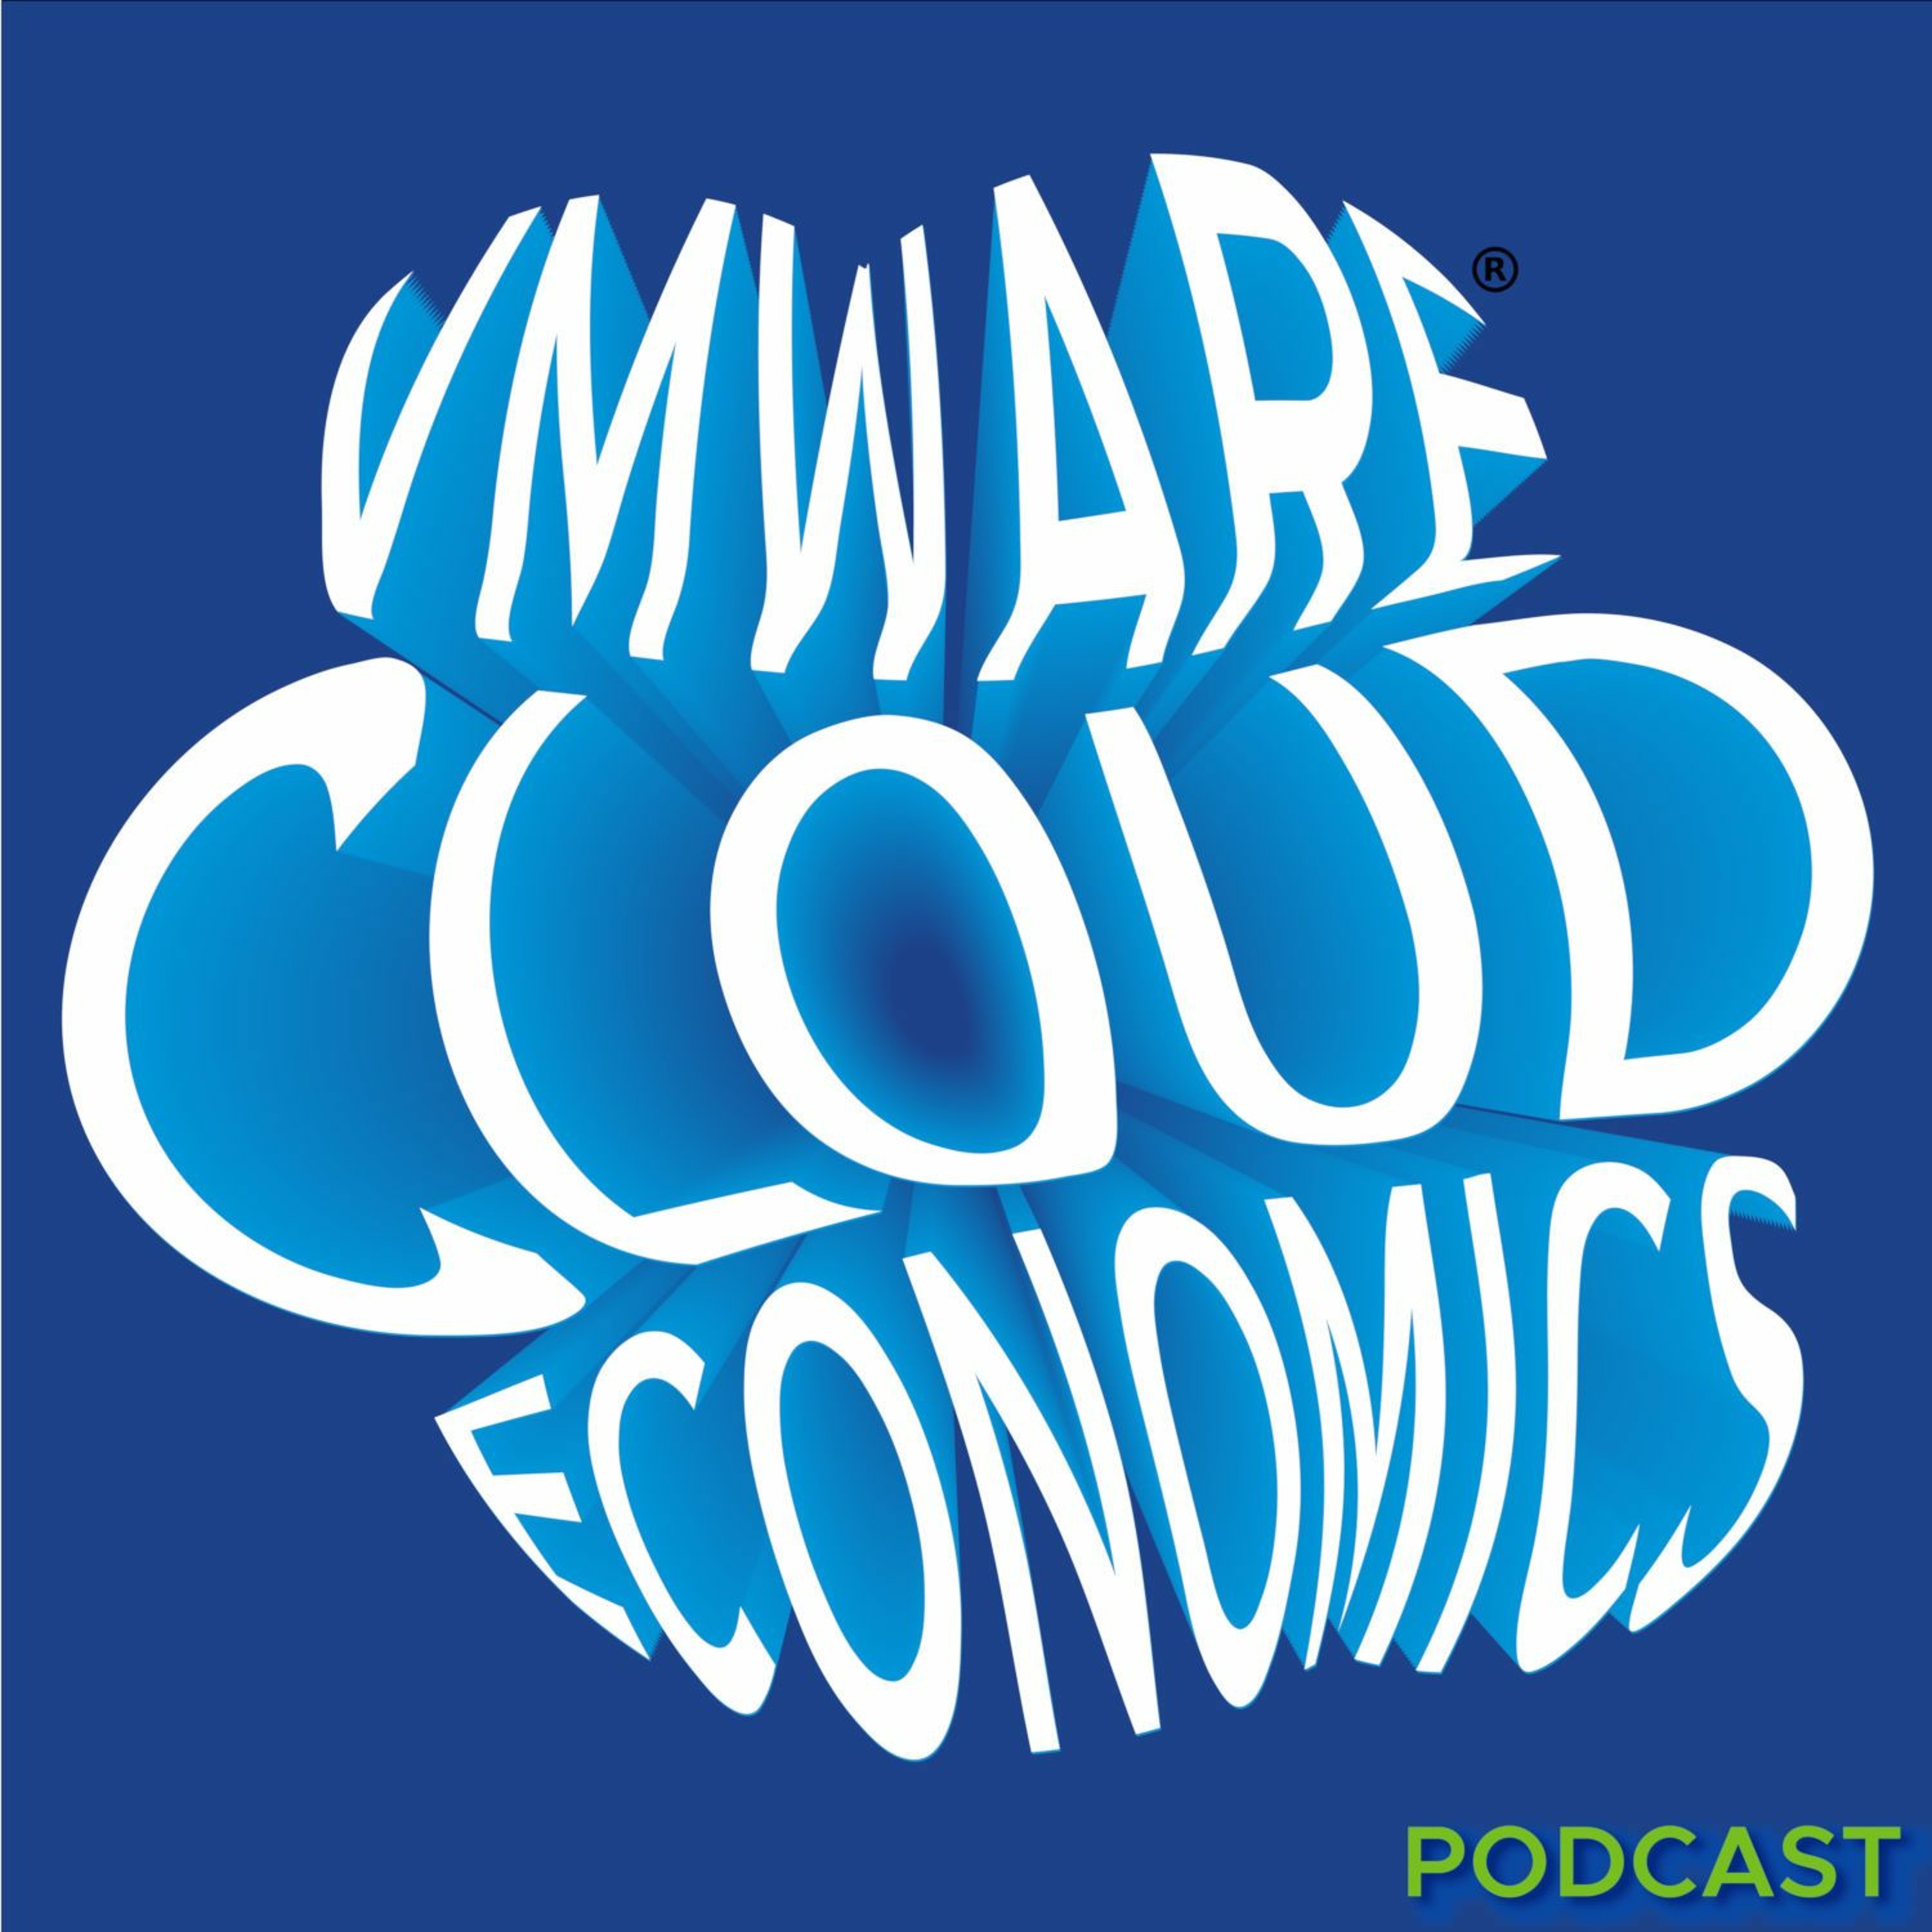 VMware Cloud Economics 101 - How you can get a VMware Cloud TCO report for your environment